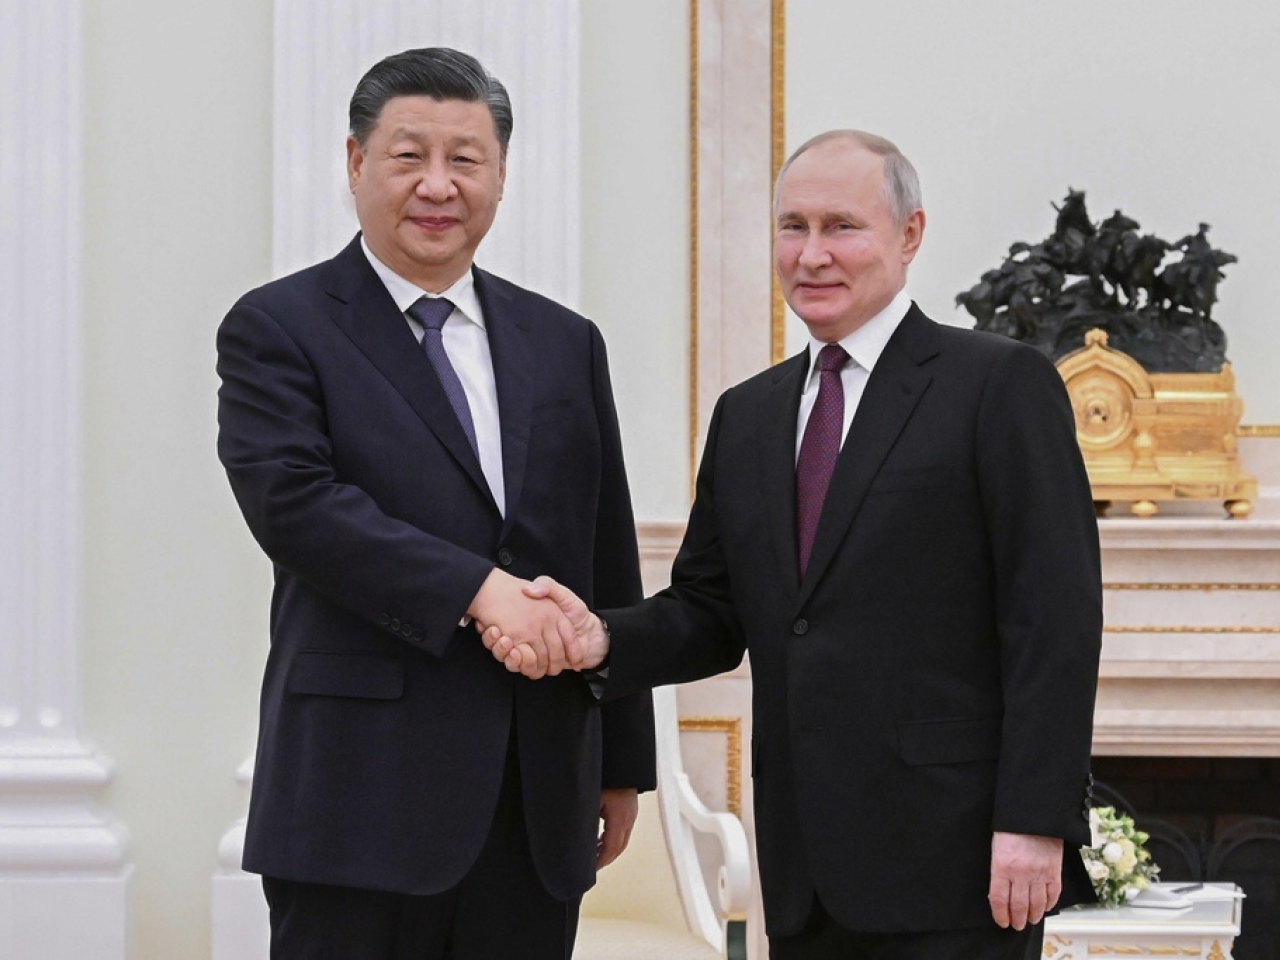 President Xi Jinping arrived in Moscow on March 20. File photo: AP